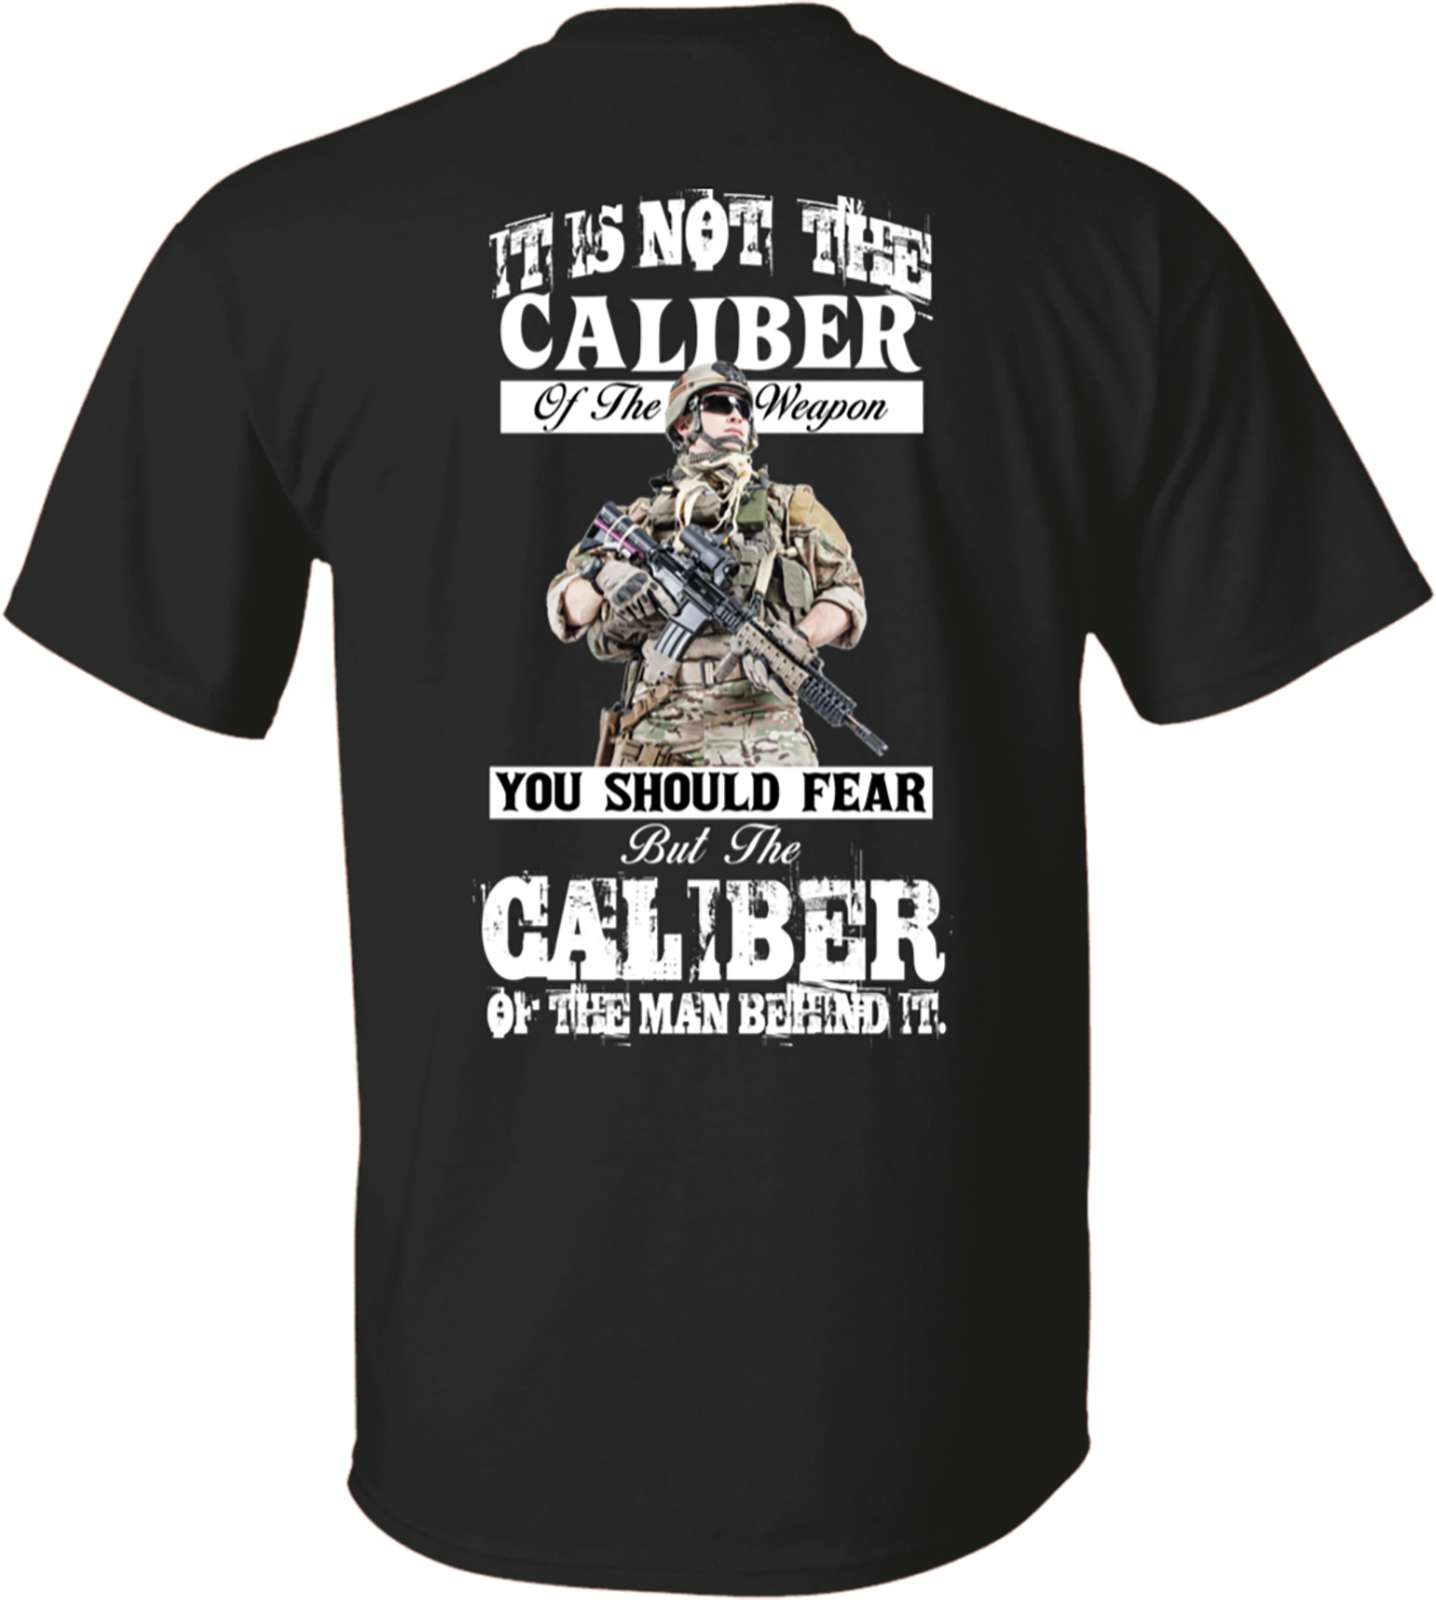 It is not the caliber of the weapon - You should fear but the caliber of the man behind it